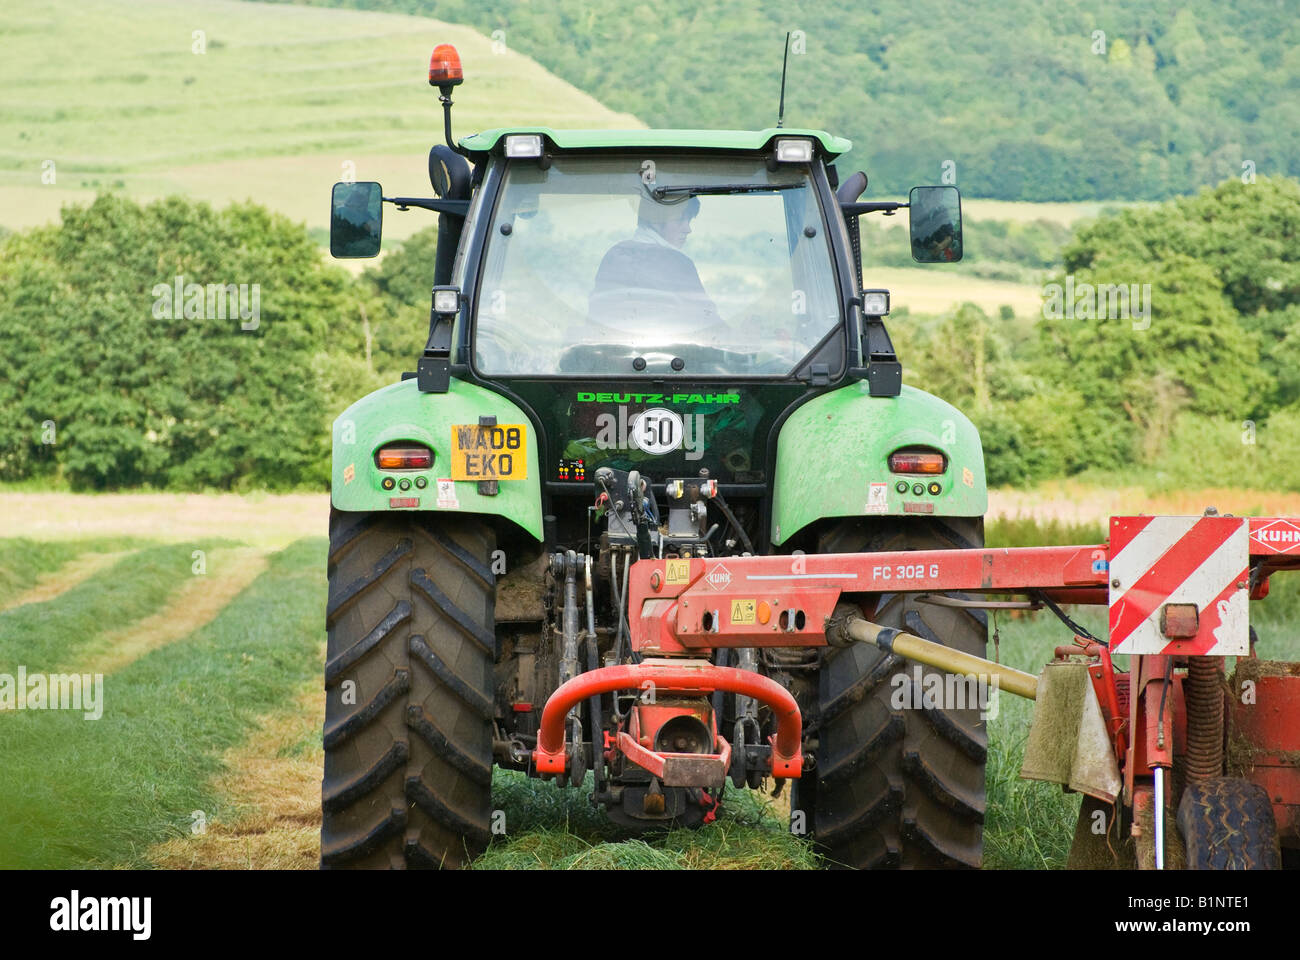 Deutz Fahr Agrotron 180 7 tractor manufactured in Italy cutting silage in a Wiltshire field Stock Photo